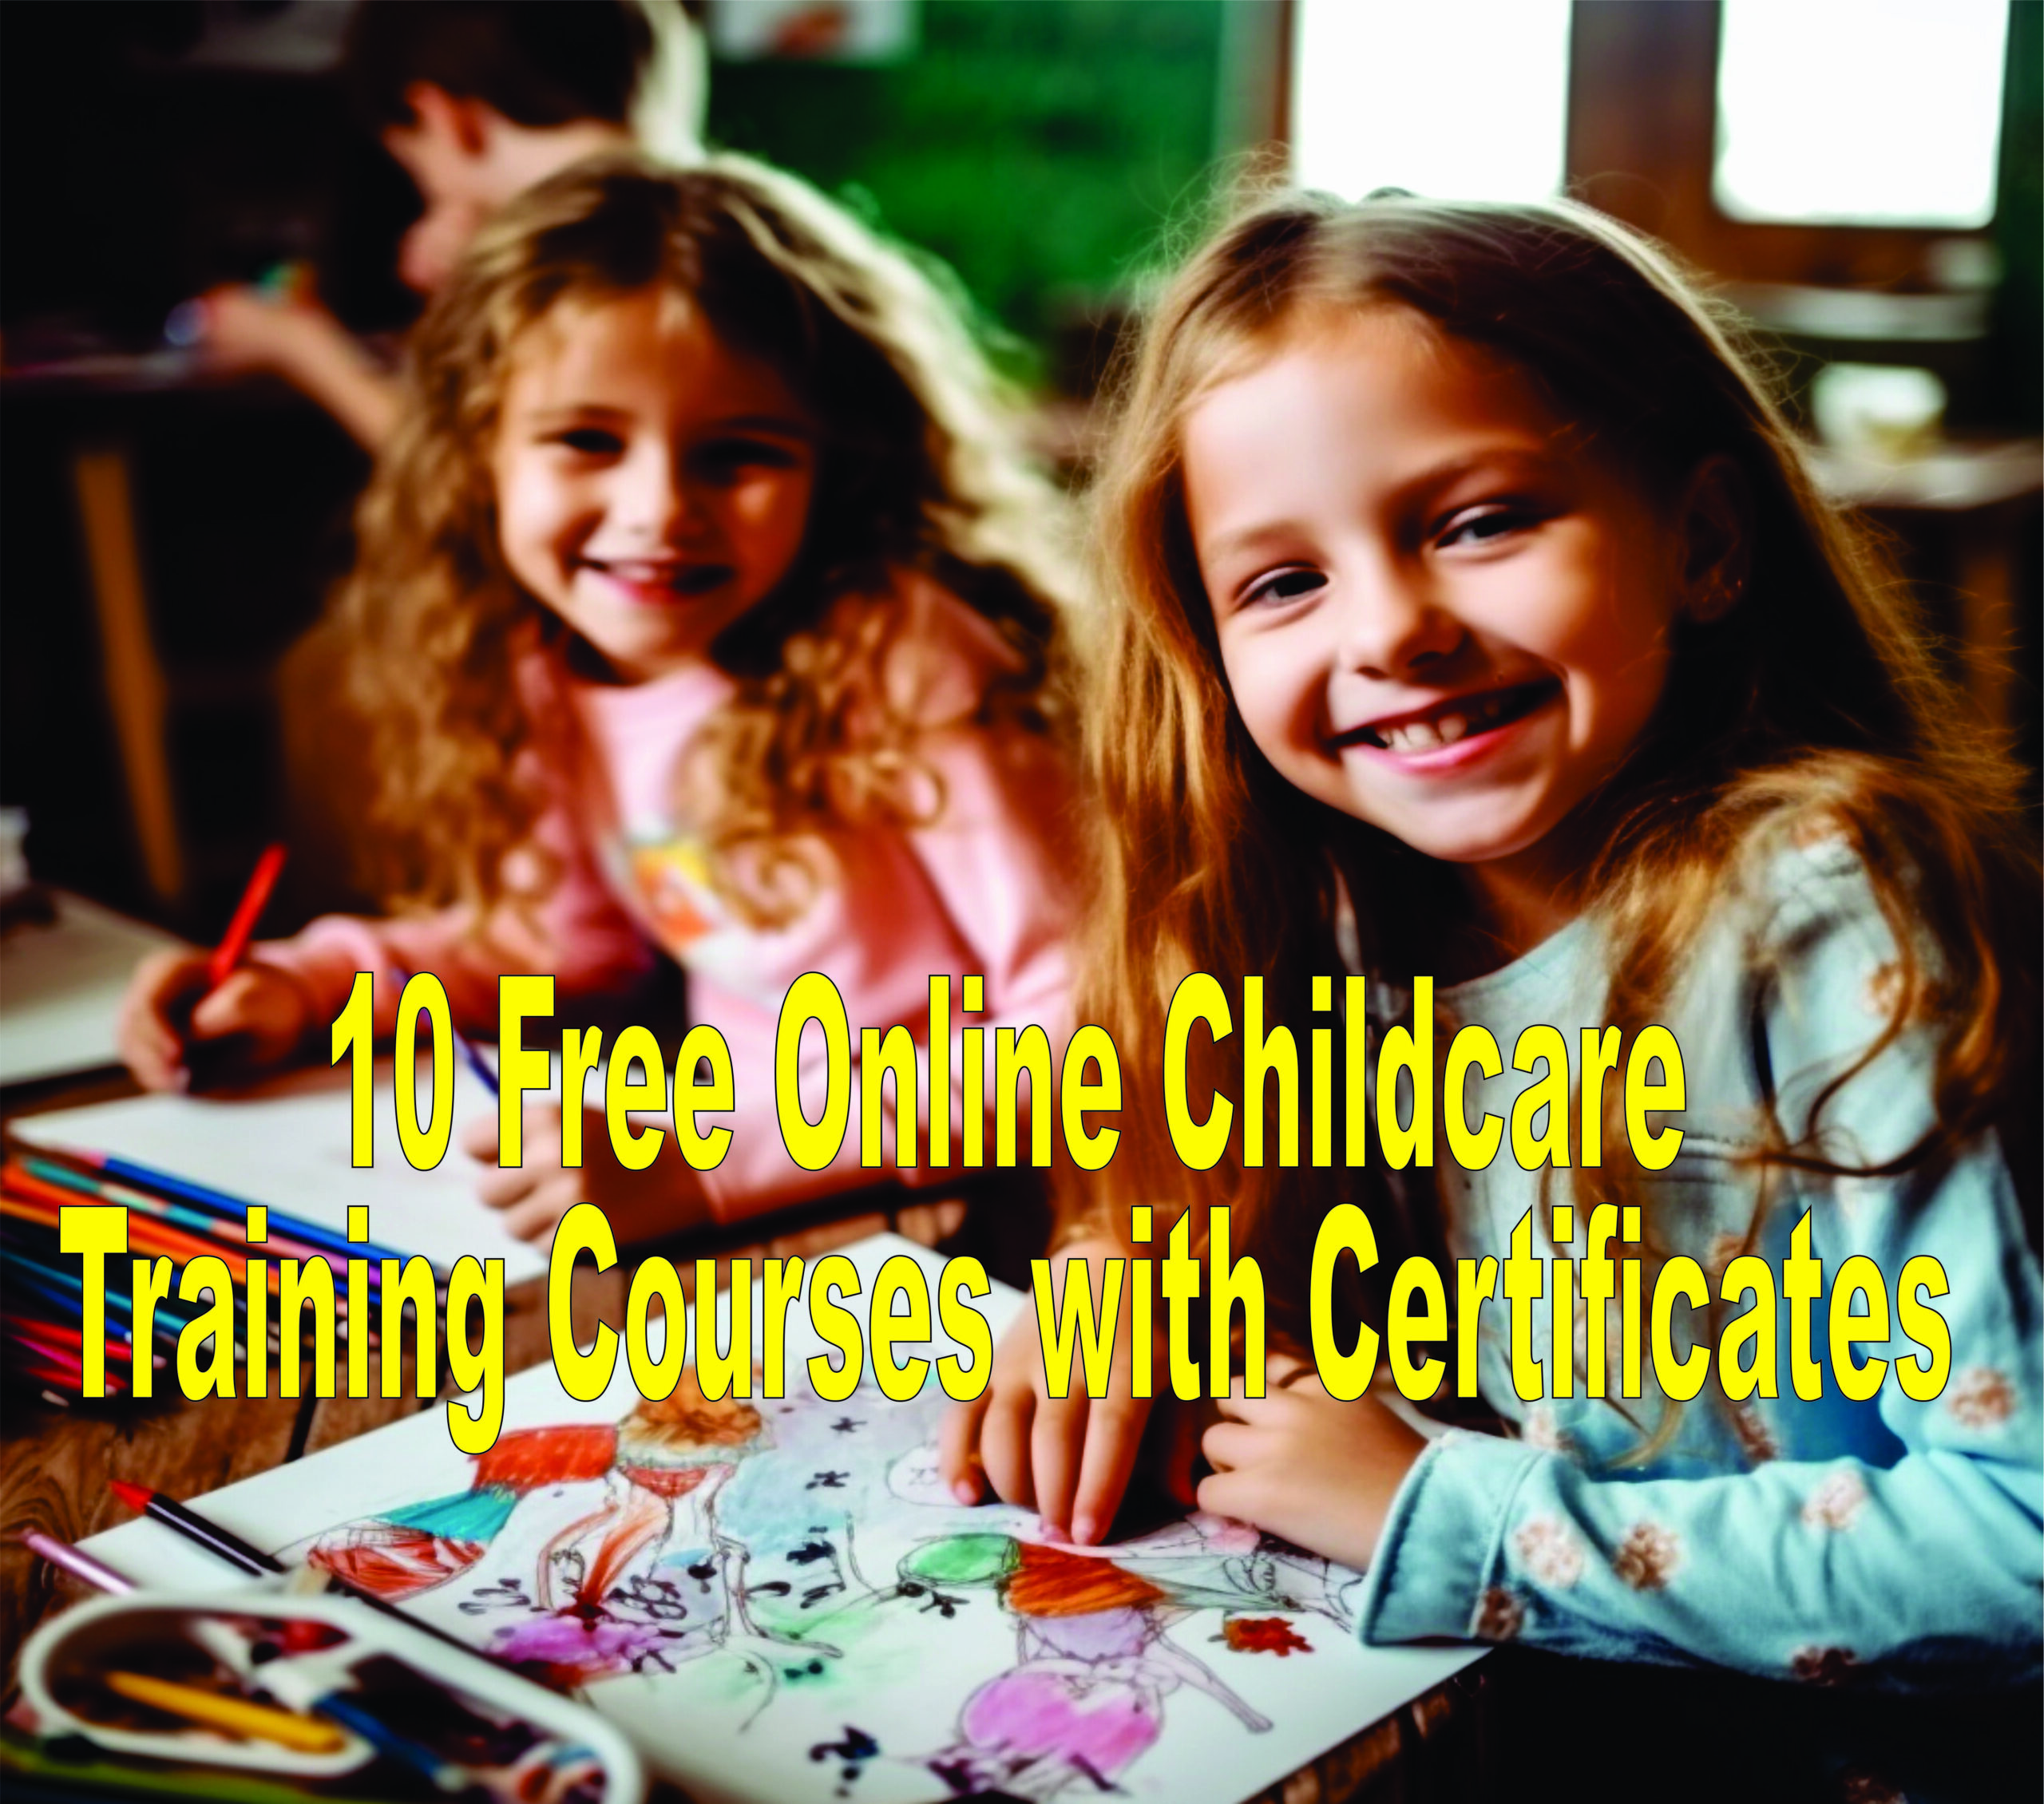 10 Free Online Childcare Training Courses With Certificates